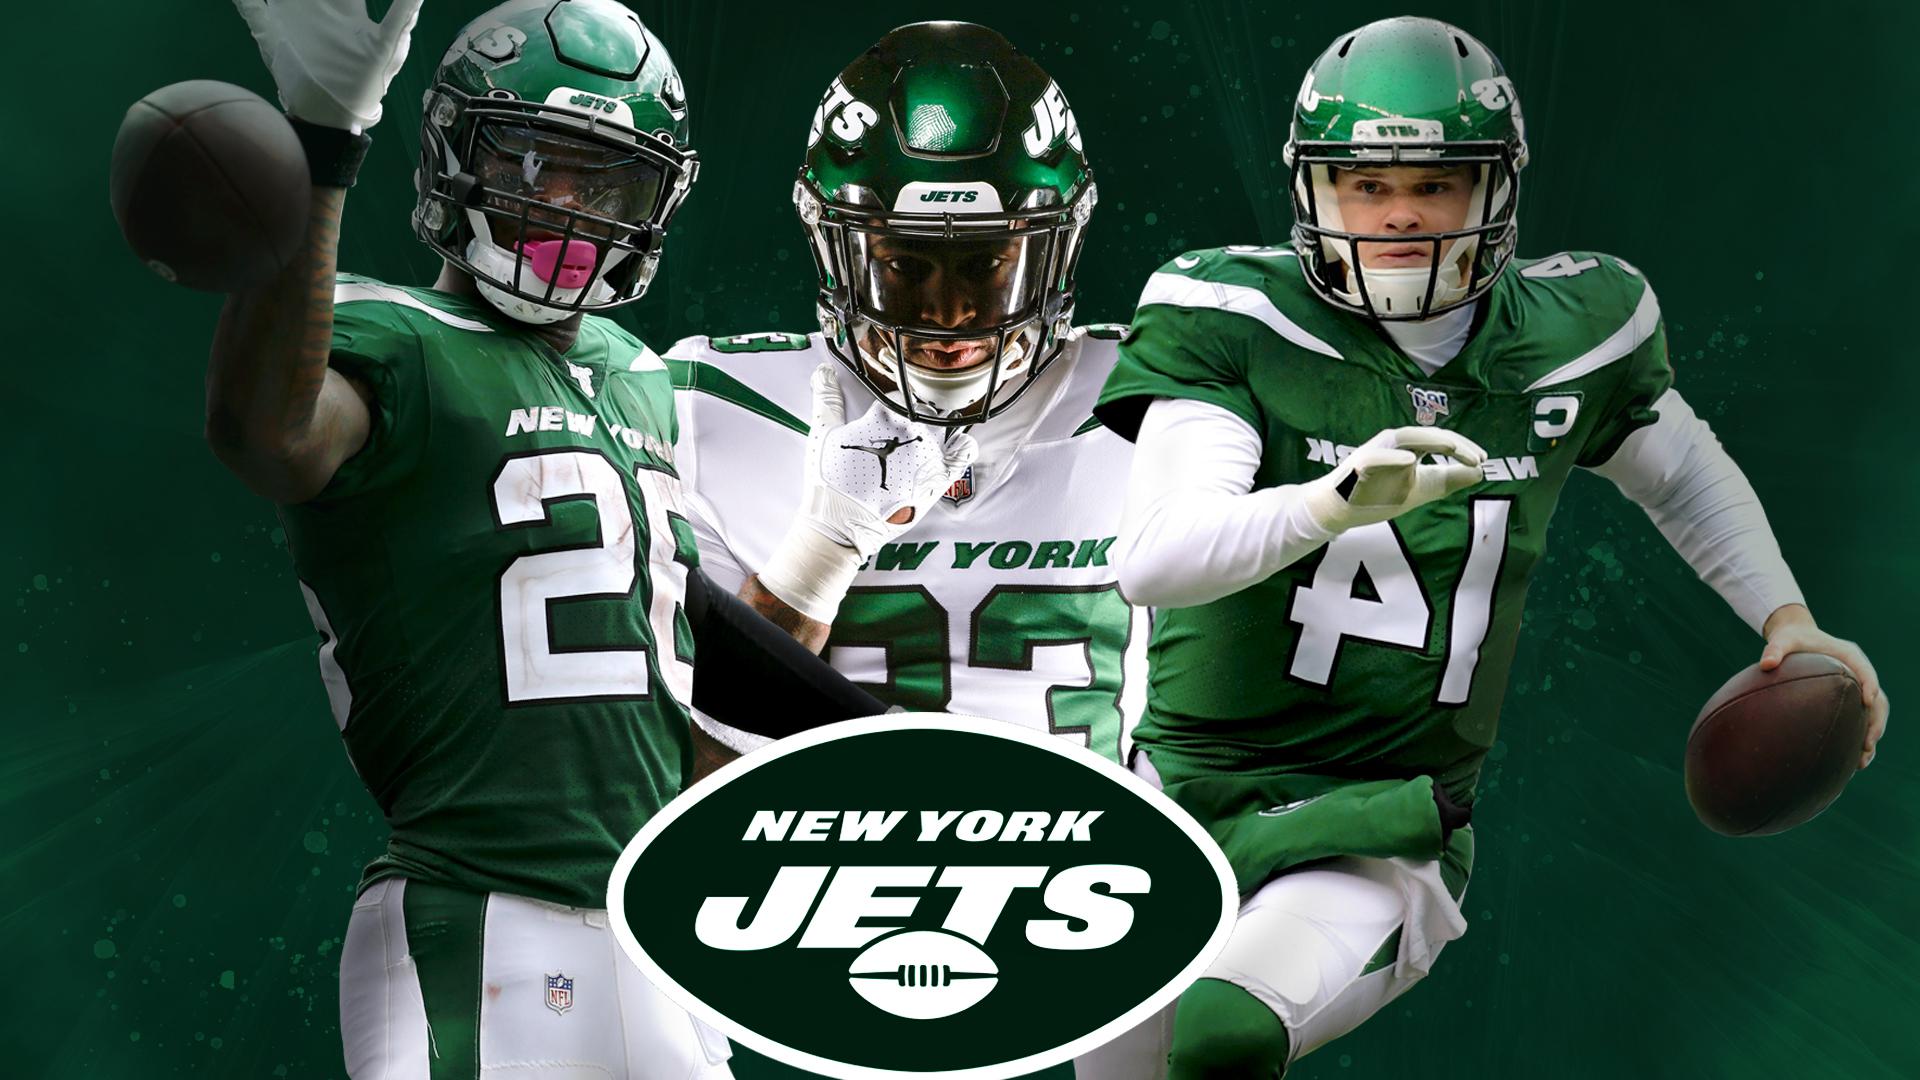 BETTING ANALYSIS FOR THE NEW YORK JETS